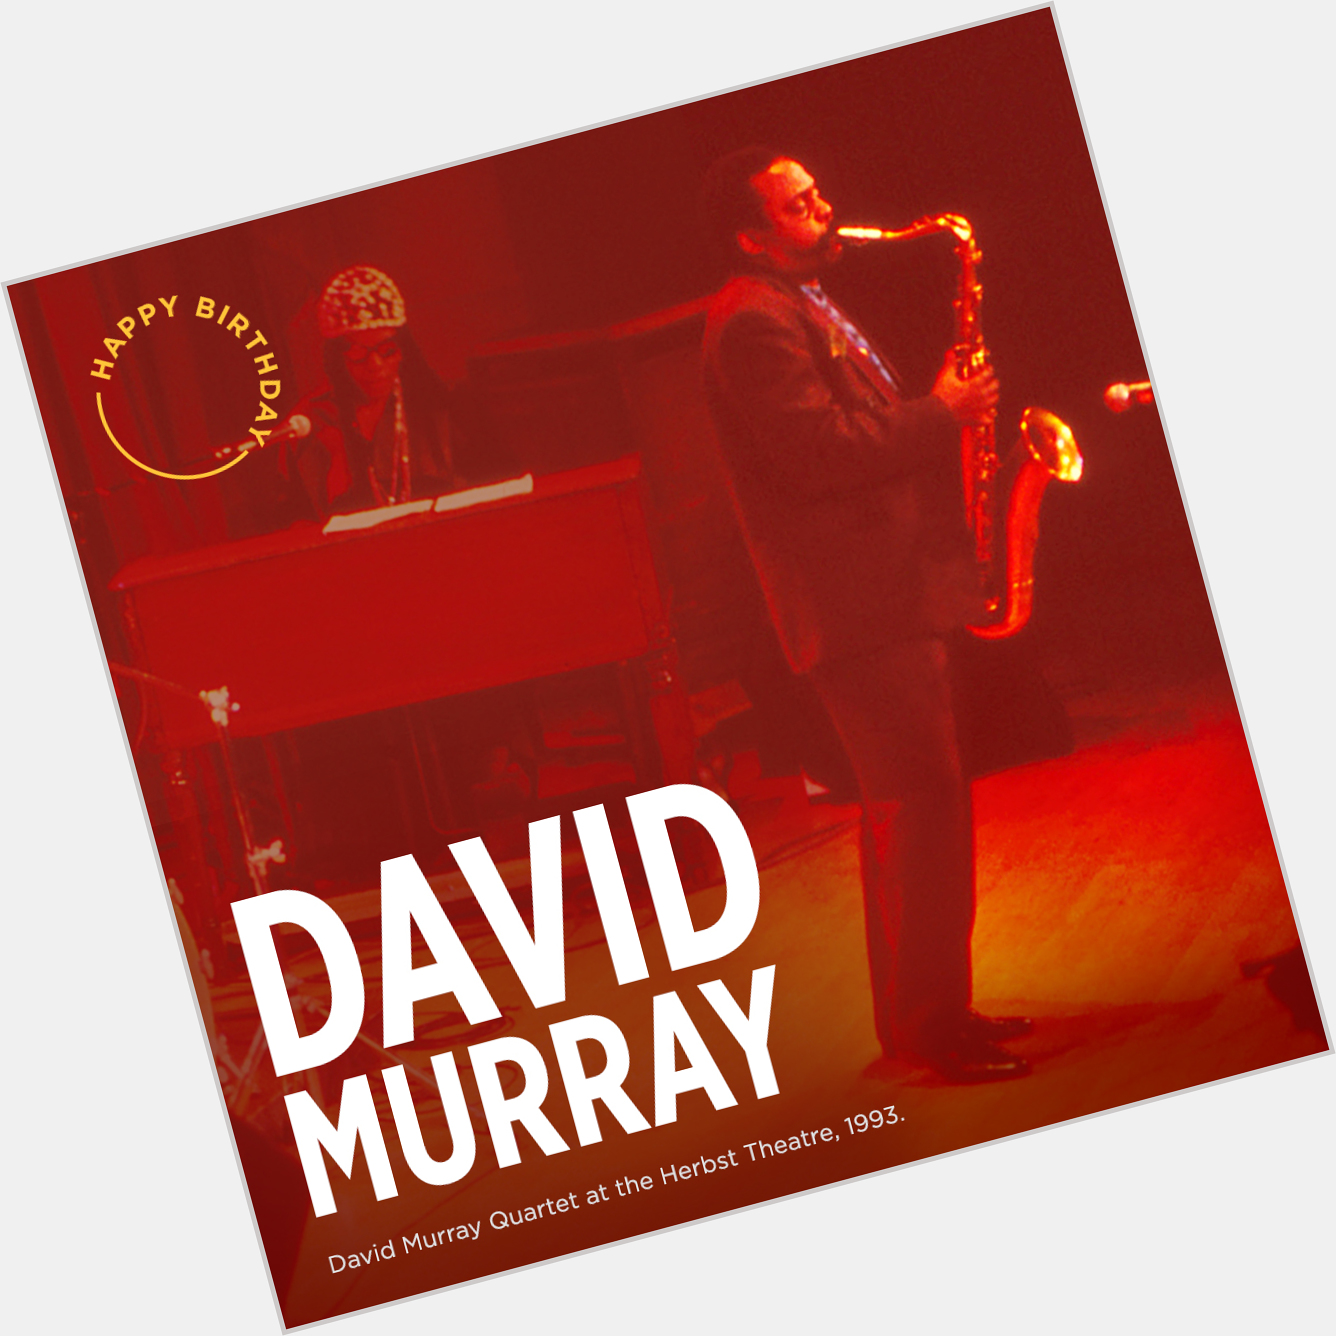 Wishing a Happy Birthday to saxophonist and composer David Murray, who turns 67 today!  